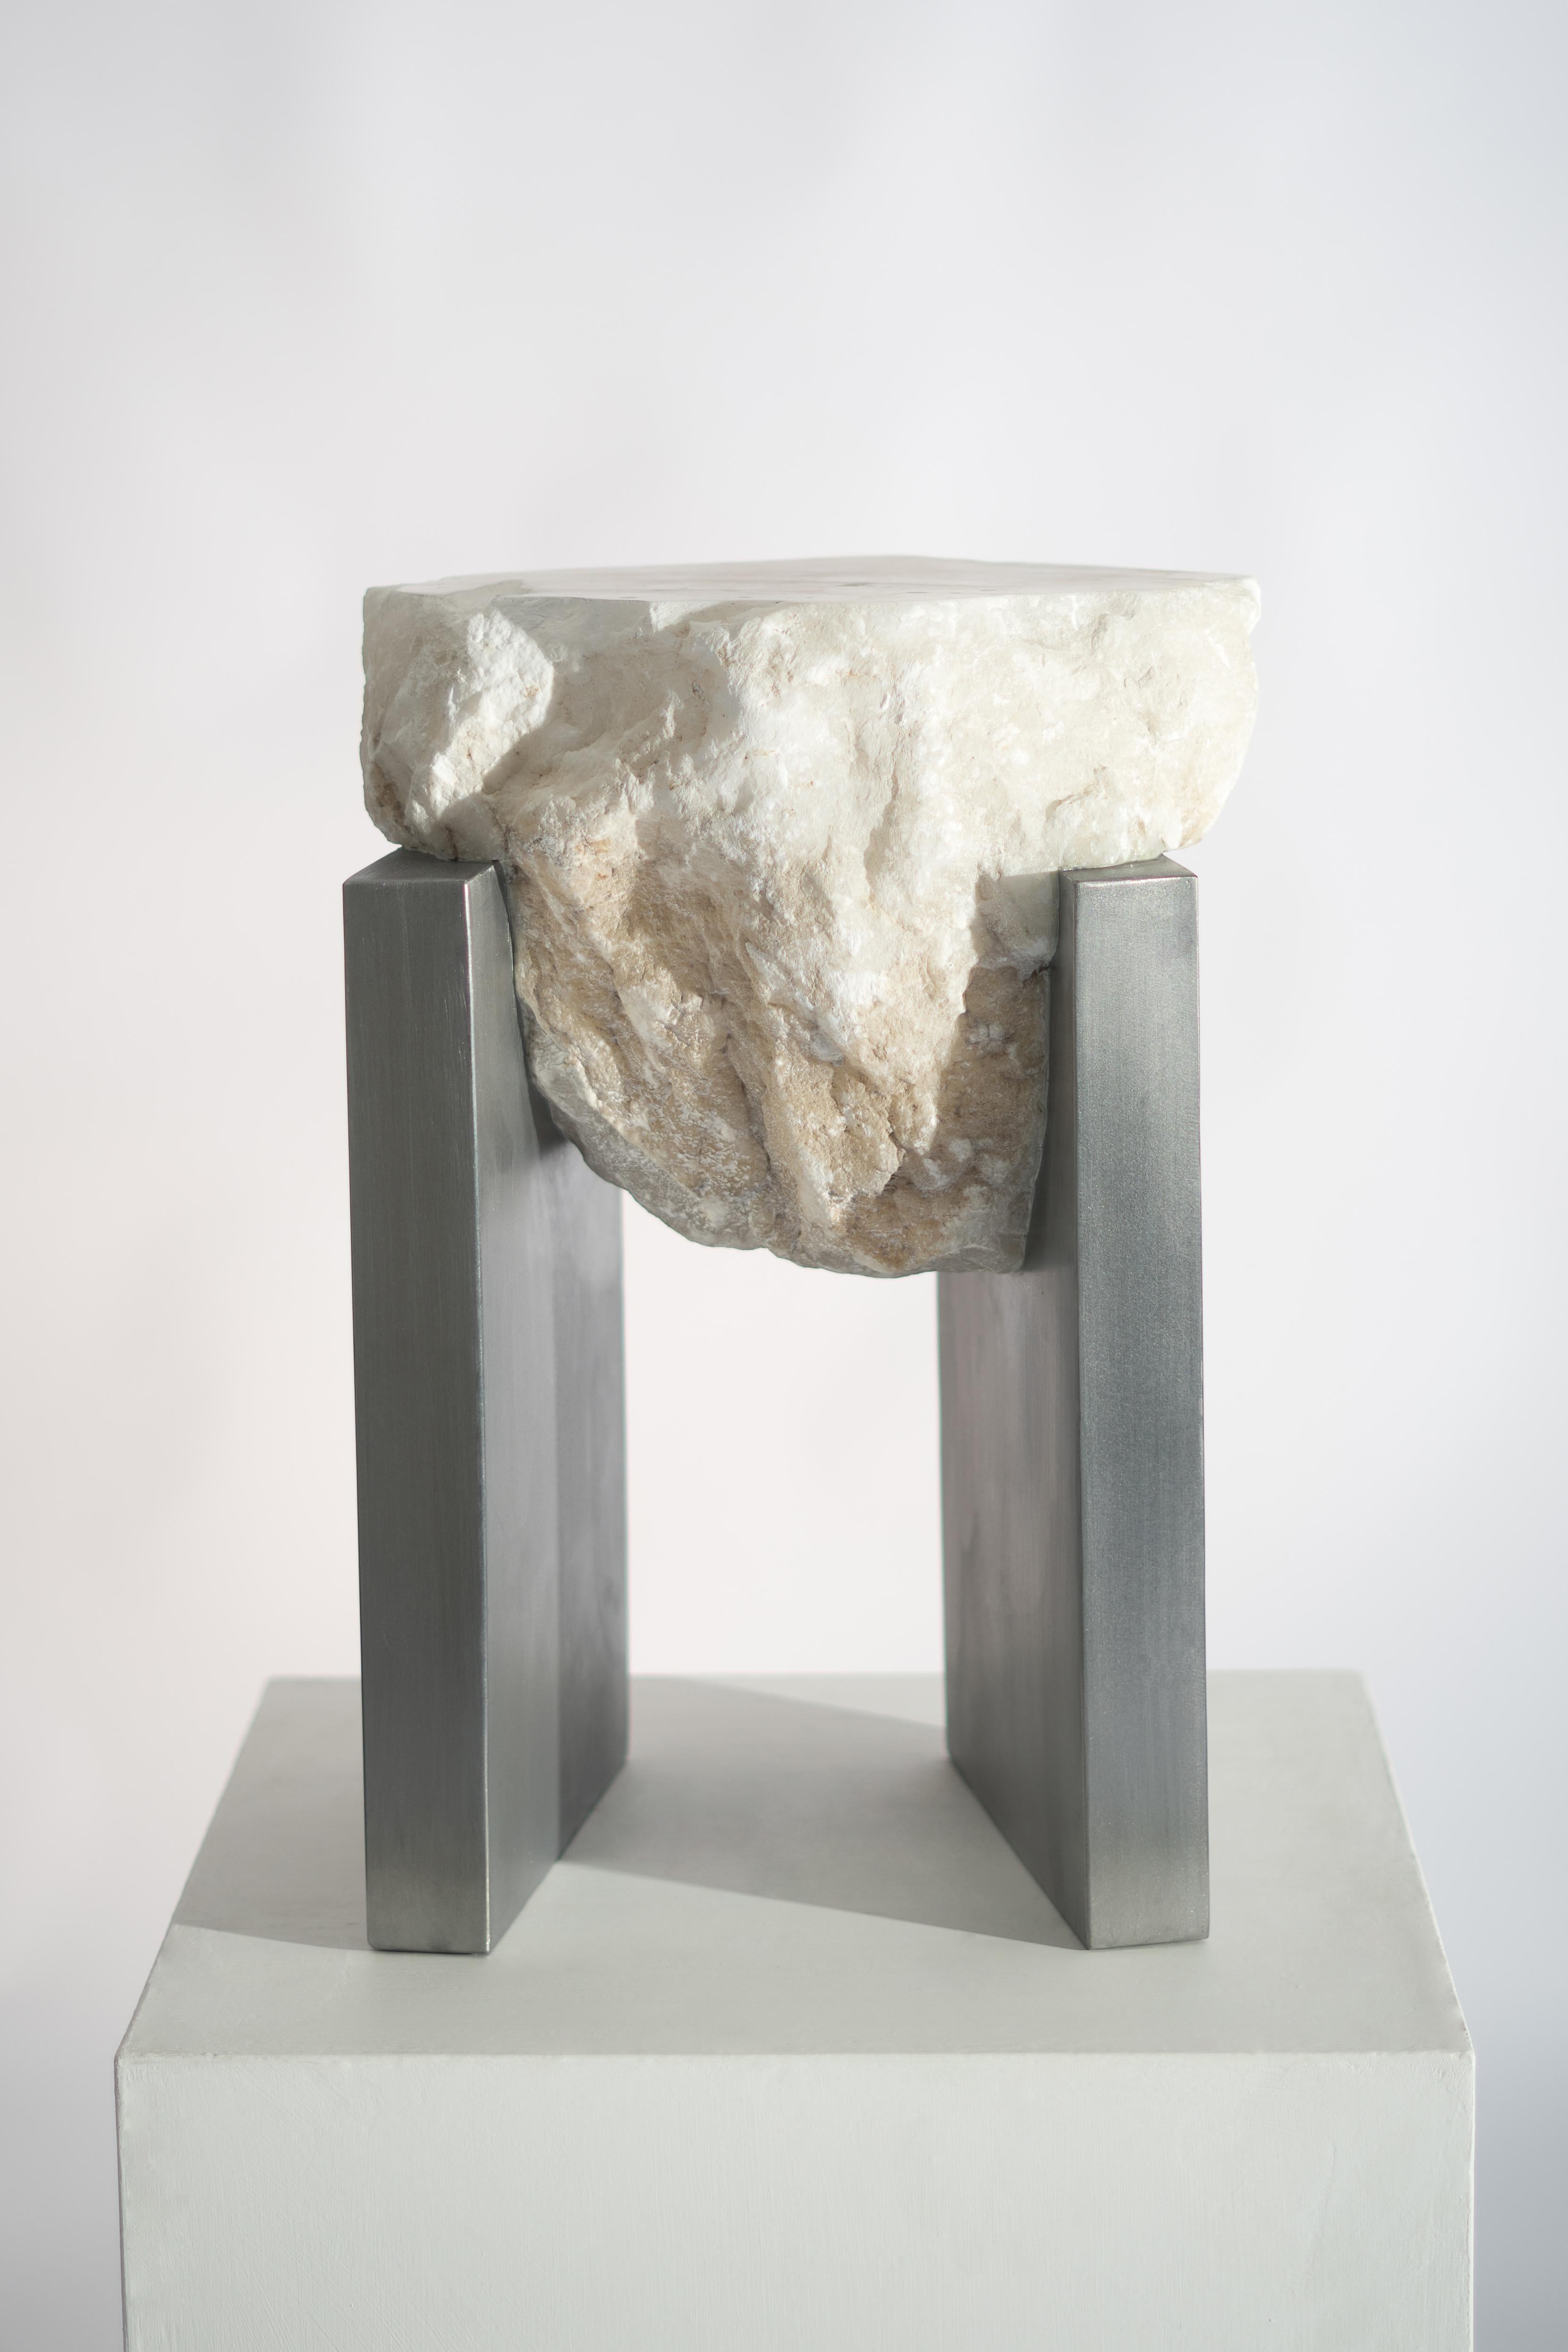 Taking a seat on this handmade stool from the 'Arrival' collection of Foreign Bodies feels like embarking on a journey through the cosmos. Drawing inspiration from asteroids, moons, and celestial bodies, it exudes a sense of wonder and